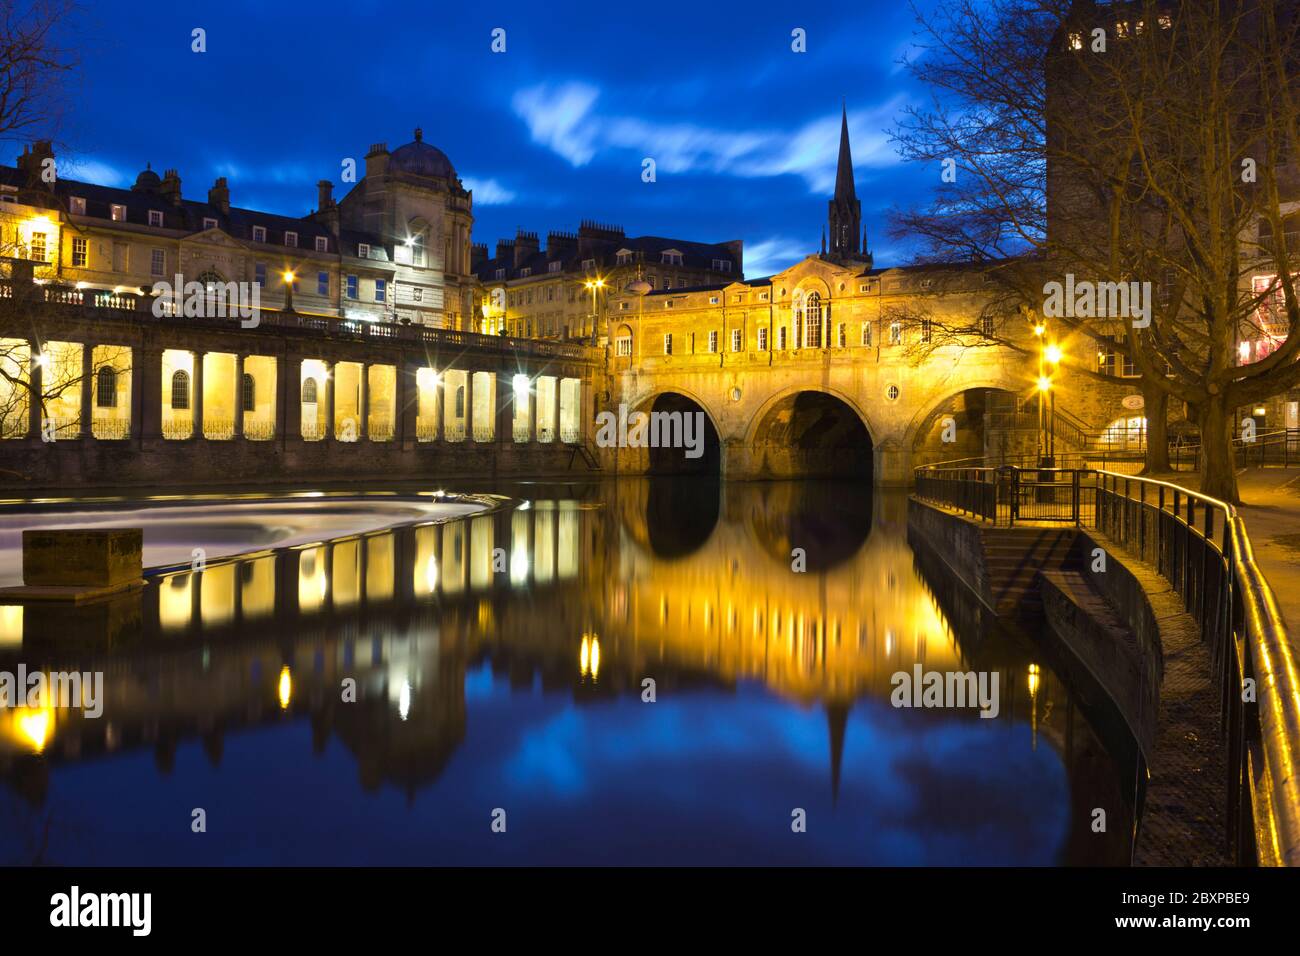 Pulteney Bridge over the River Avon at night, Bath, Bath and North East Somerset, England, UK Stock Photo